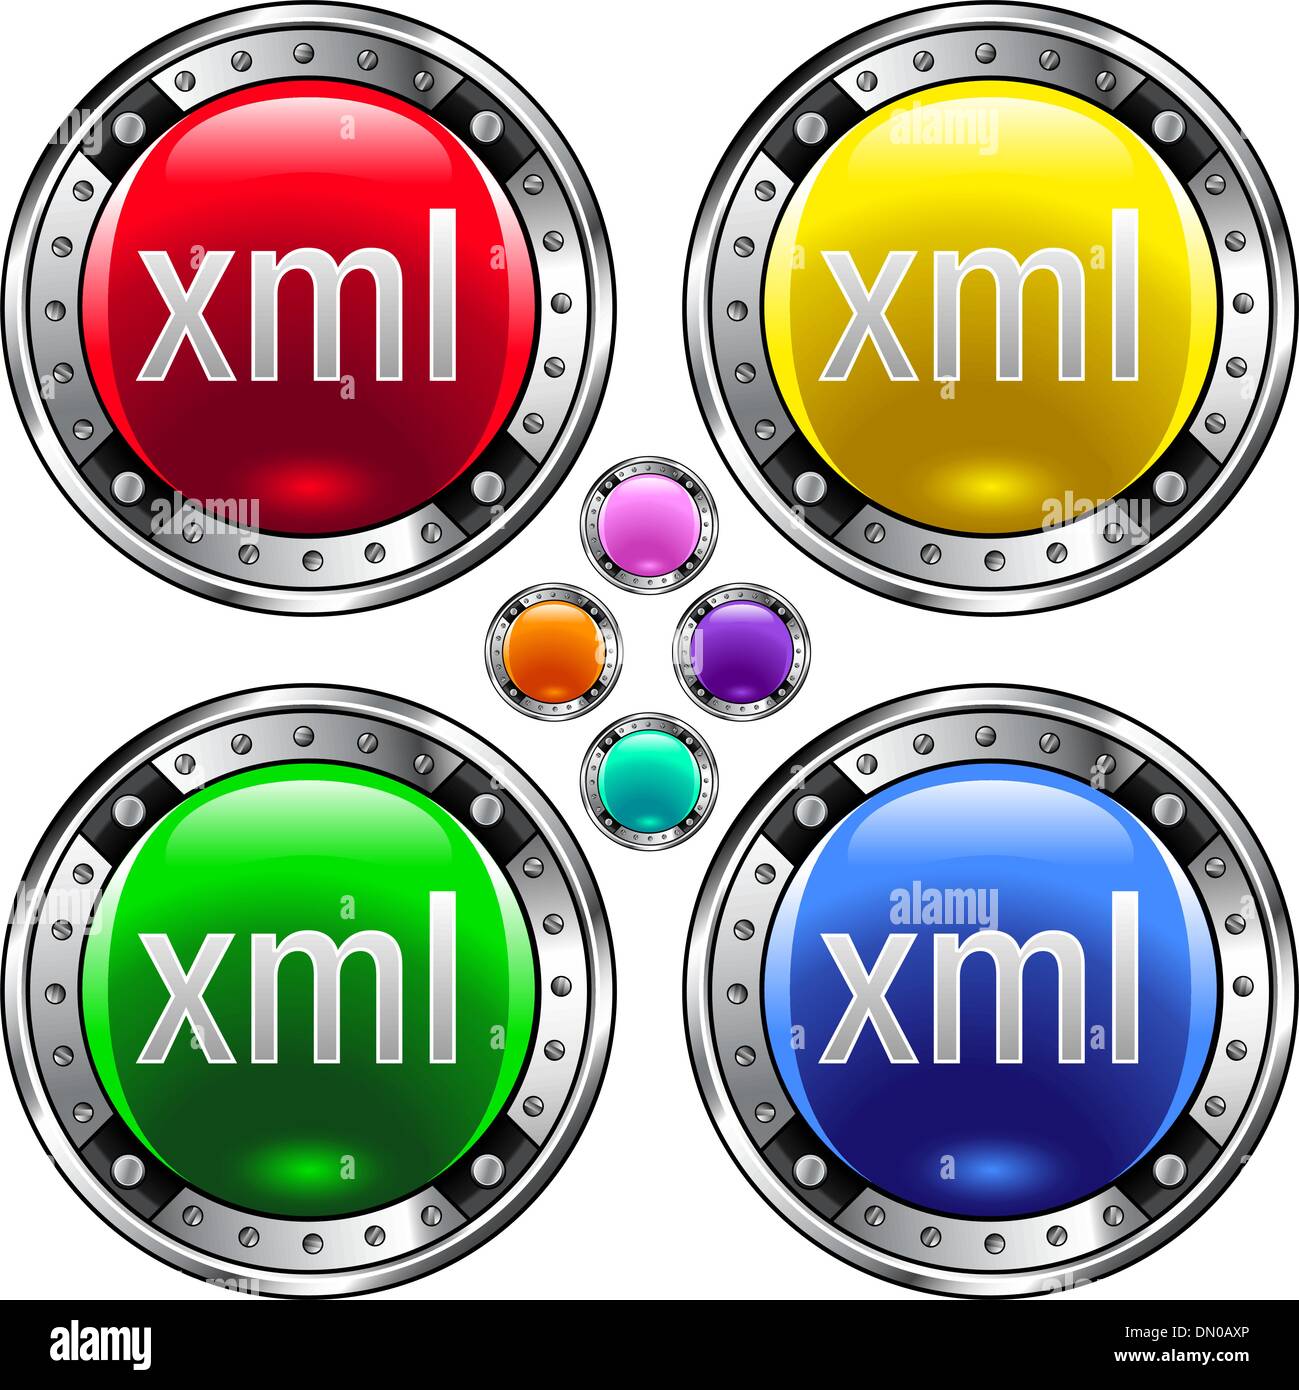 XML file type colorful button Stock Vector